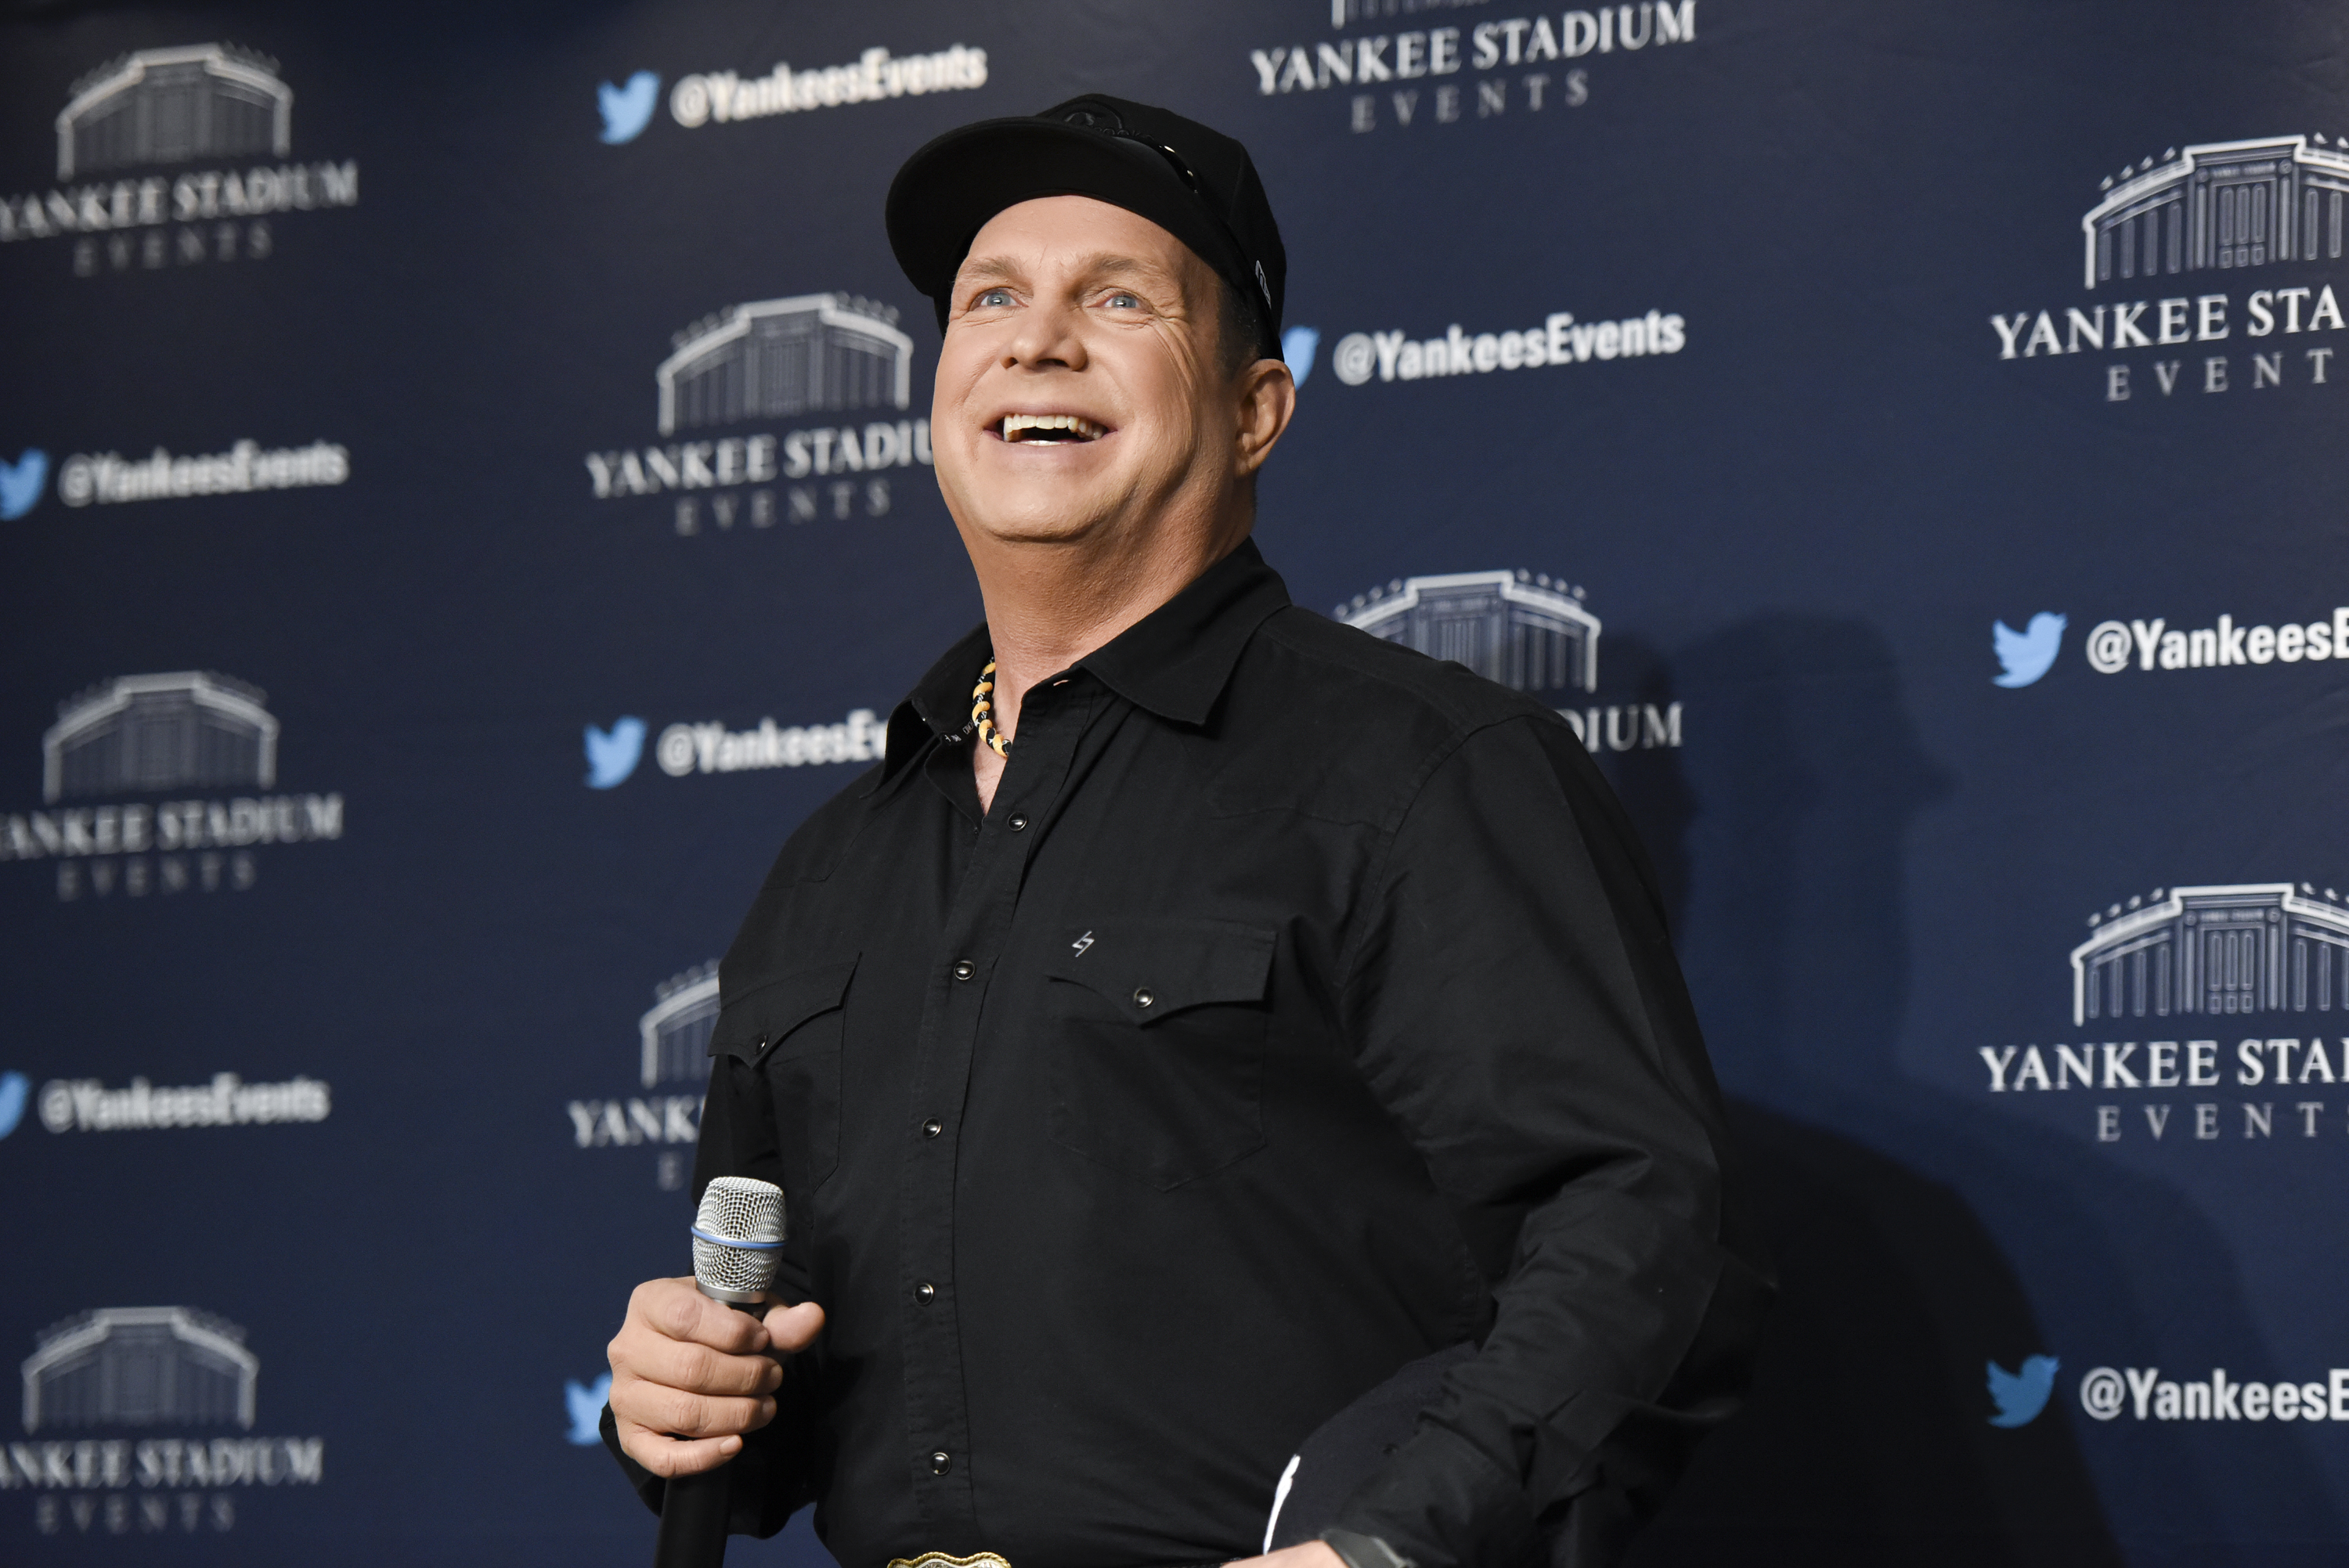 Garth Brooks attends Garth Brooks New York Press Conference at Yankee Stadium on May 17, 2016, in New York City. | Getty Images